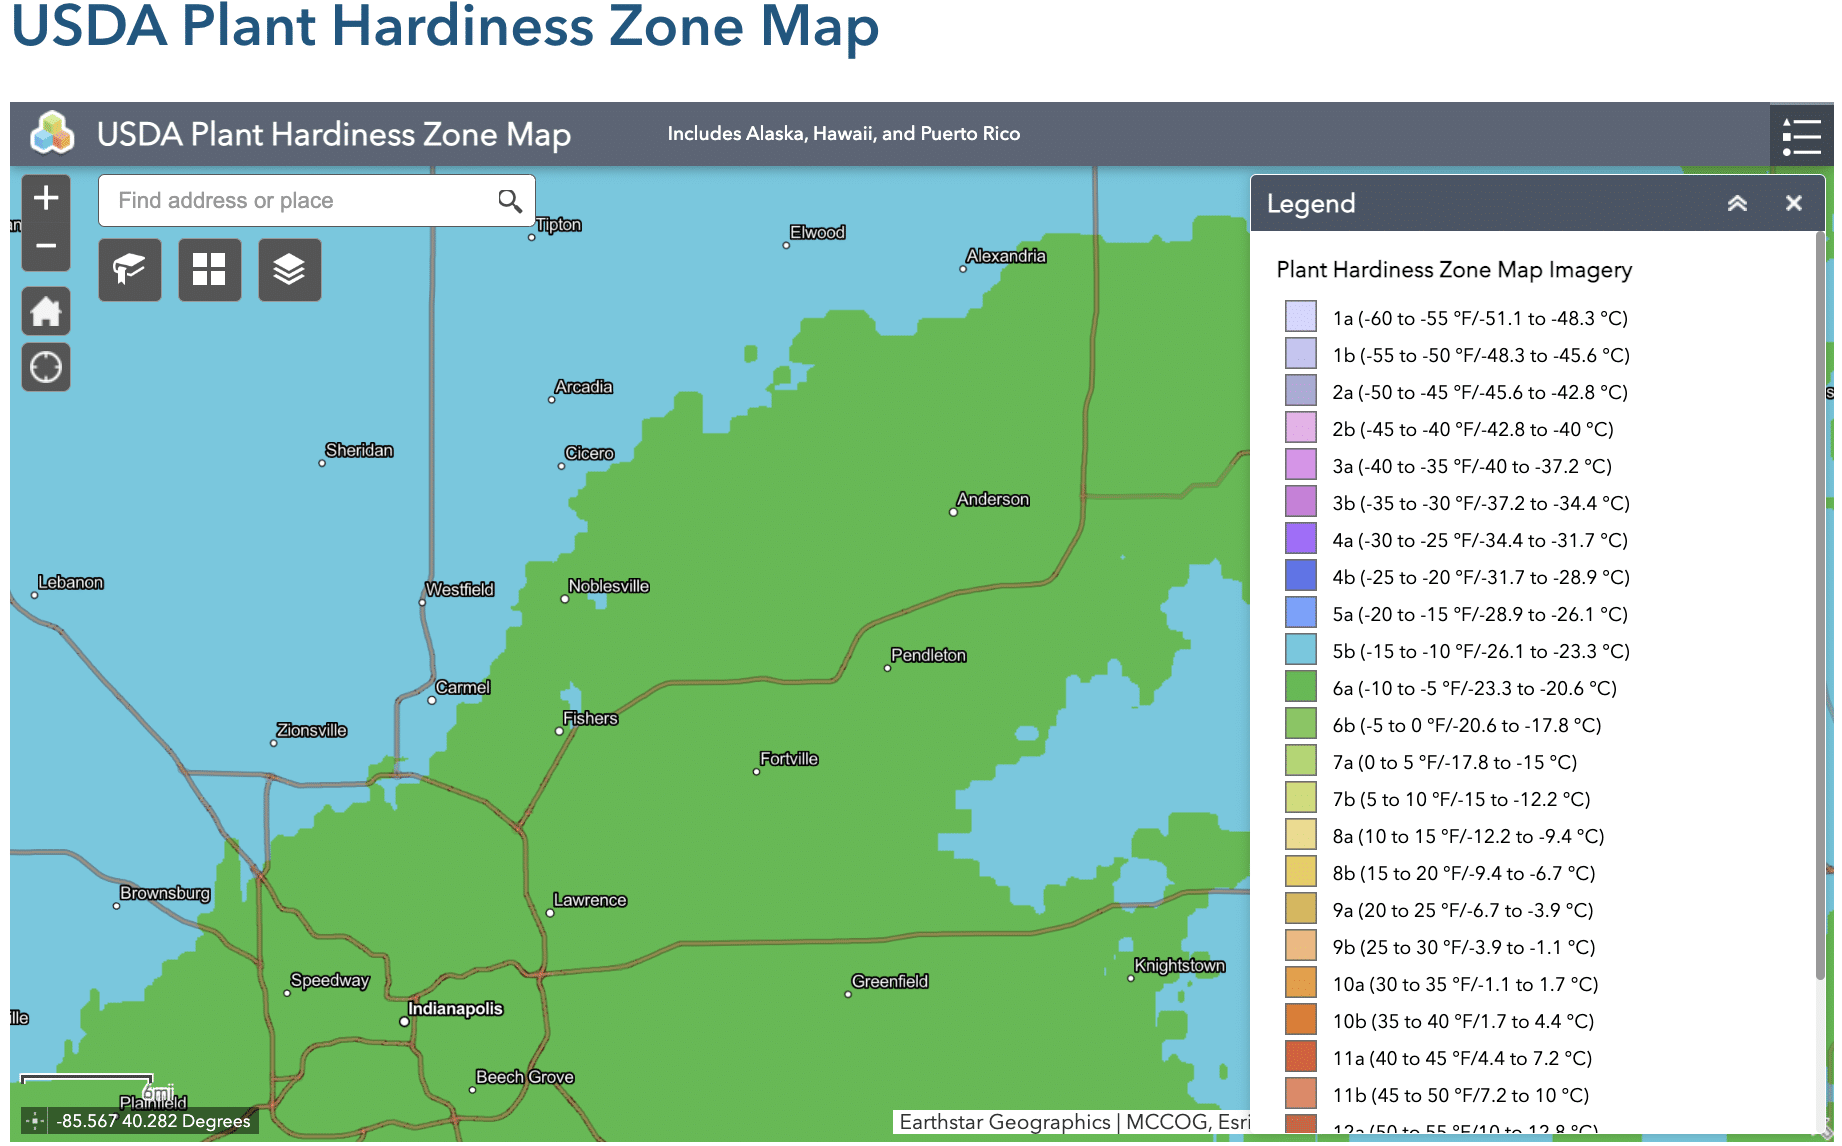 USDA Plant Hardiness Zone Map depicting Fishers and Noblesville in zone 5b/6a